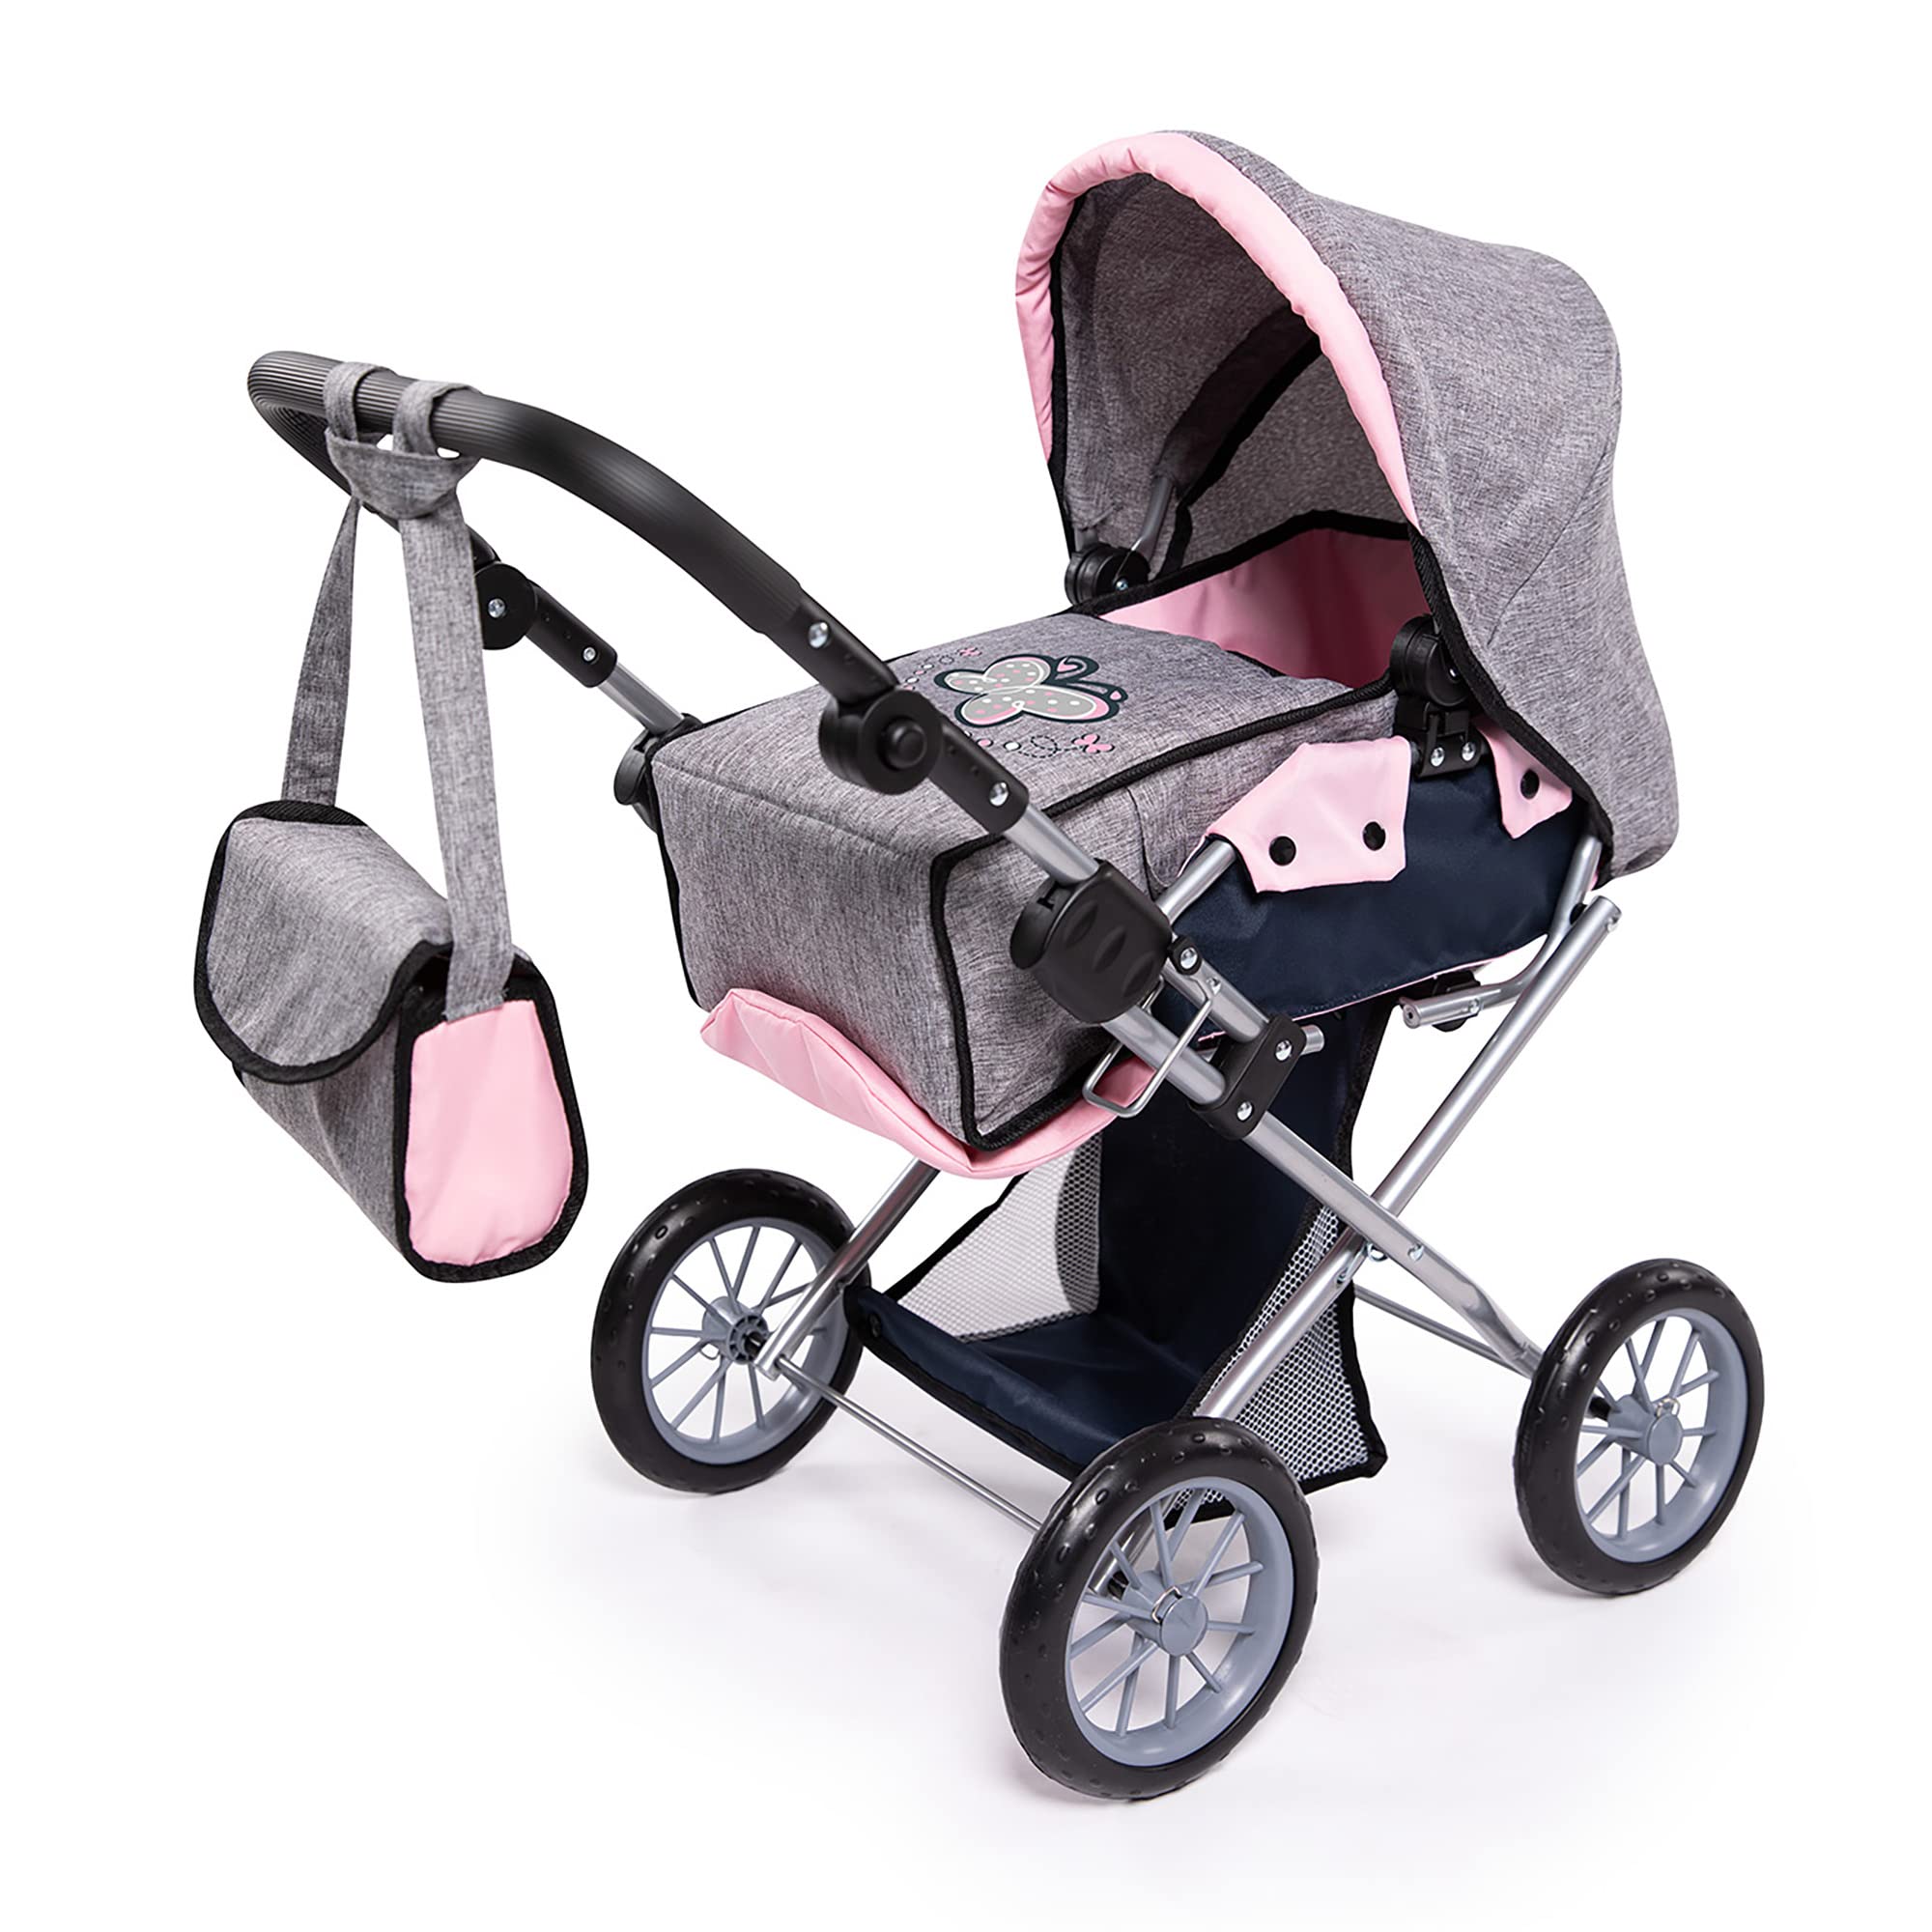 Bayer Design Dolls: Pram City Star - Grey, Pink, Butterfly - Matching Handbag, Convertible to A Pushchair, Adjustable Handle, Foldable, Integrated Basket, Ages 3+